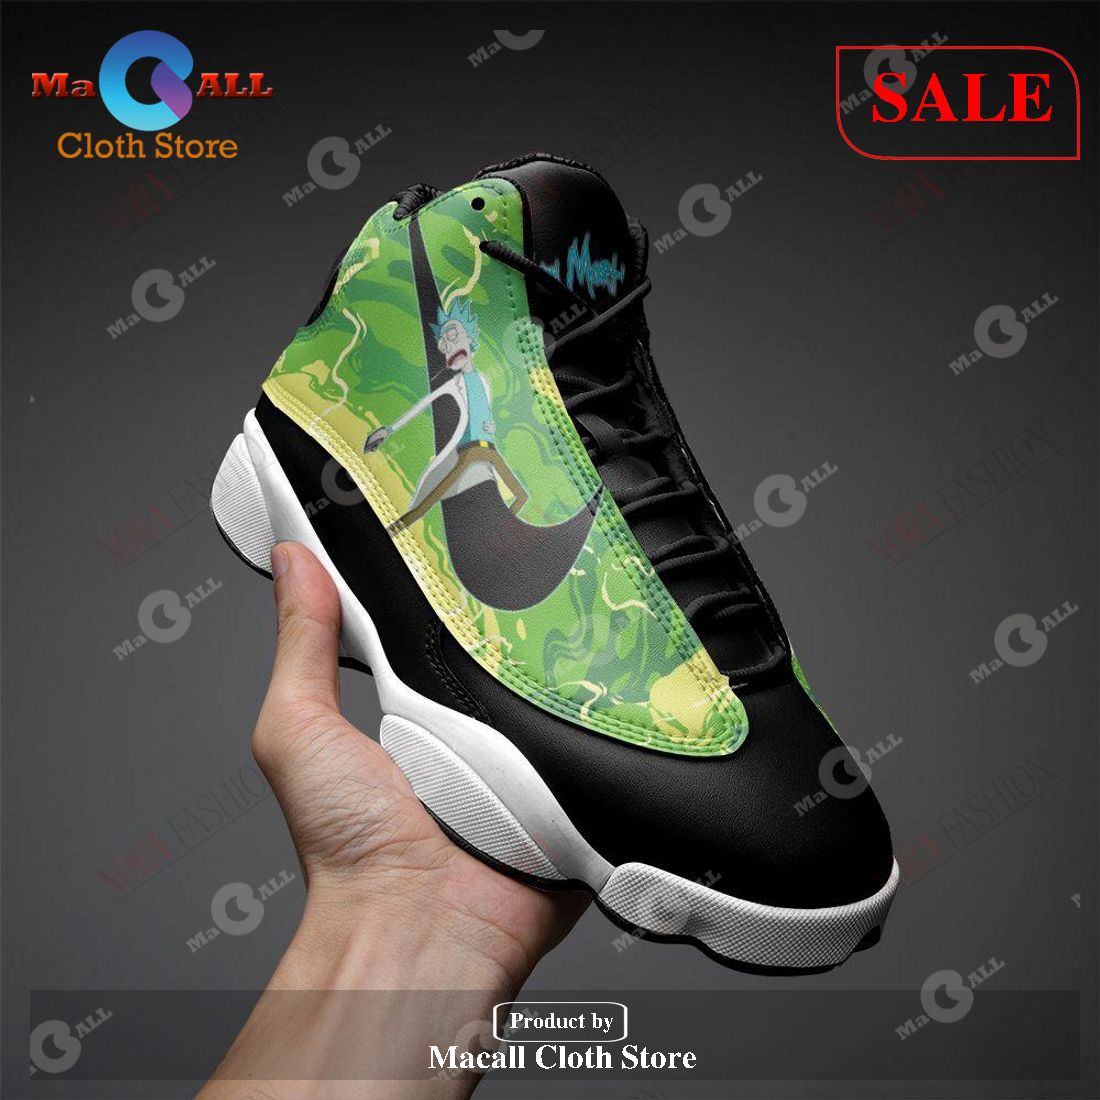 SALE] And Morty Air Jordan 13 Sneakers Sport - Macall Store - for fashionistas